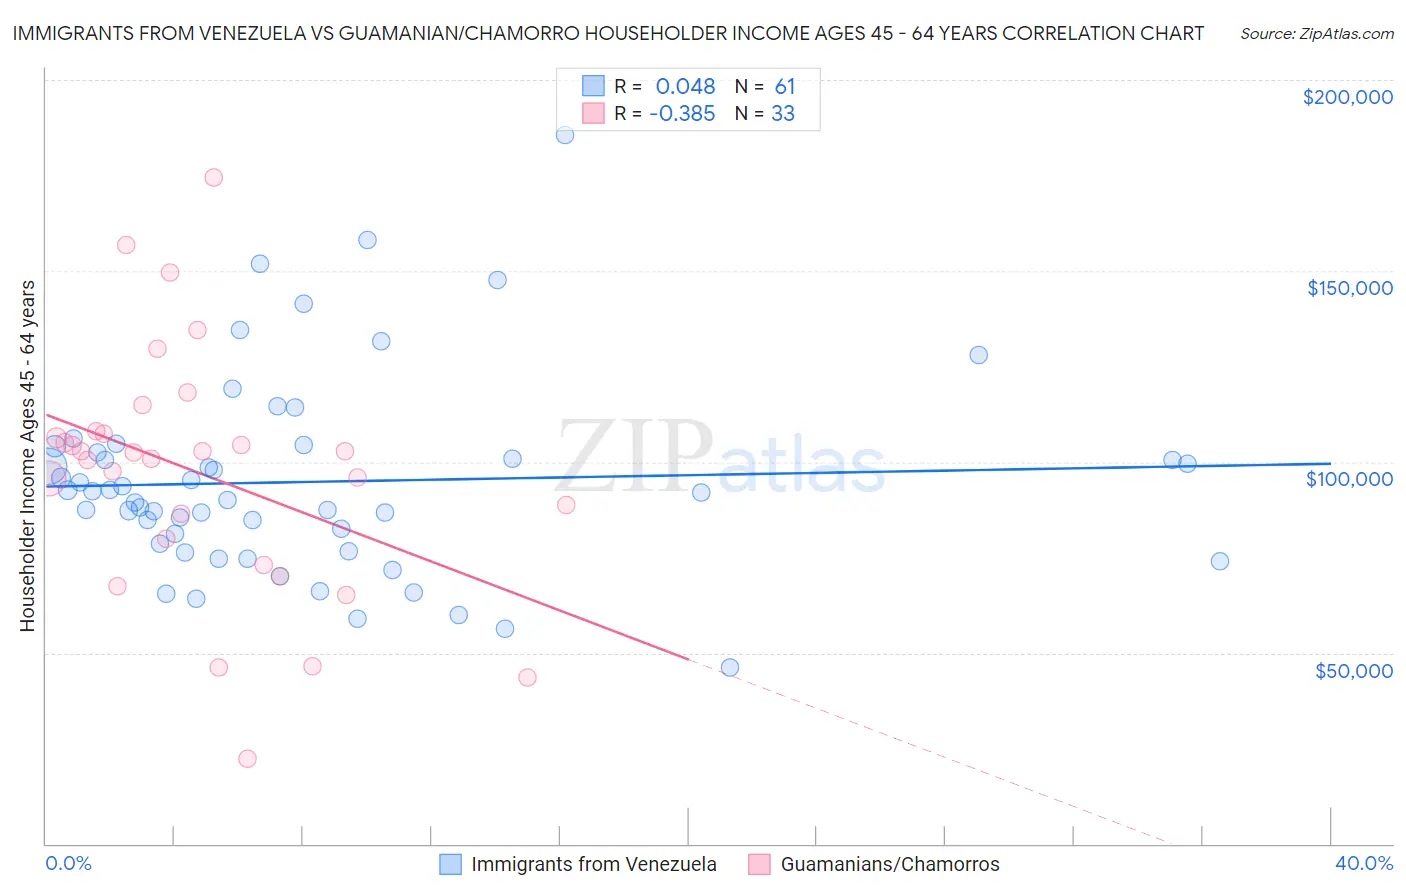 Immigrants from Venezuela vs Guamanian/Chamorro Householder Income Ages 45 - 64 years